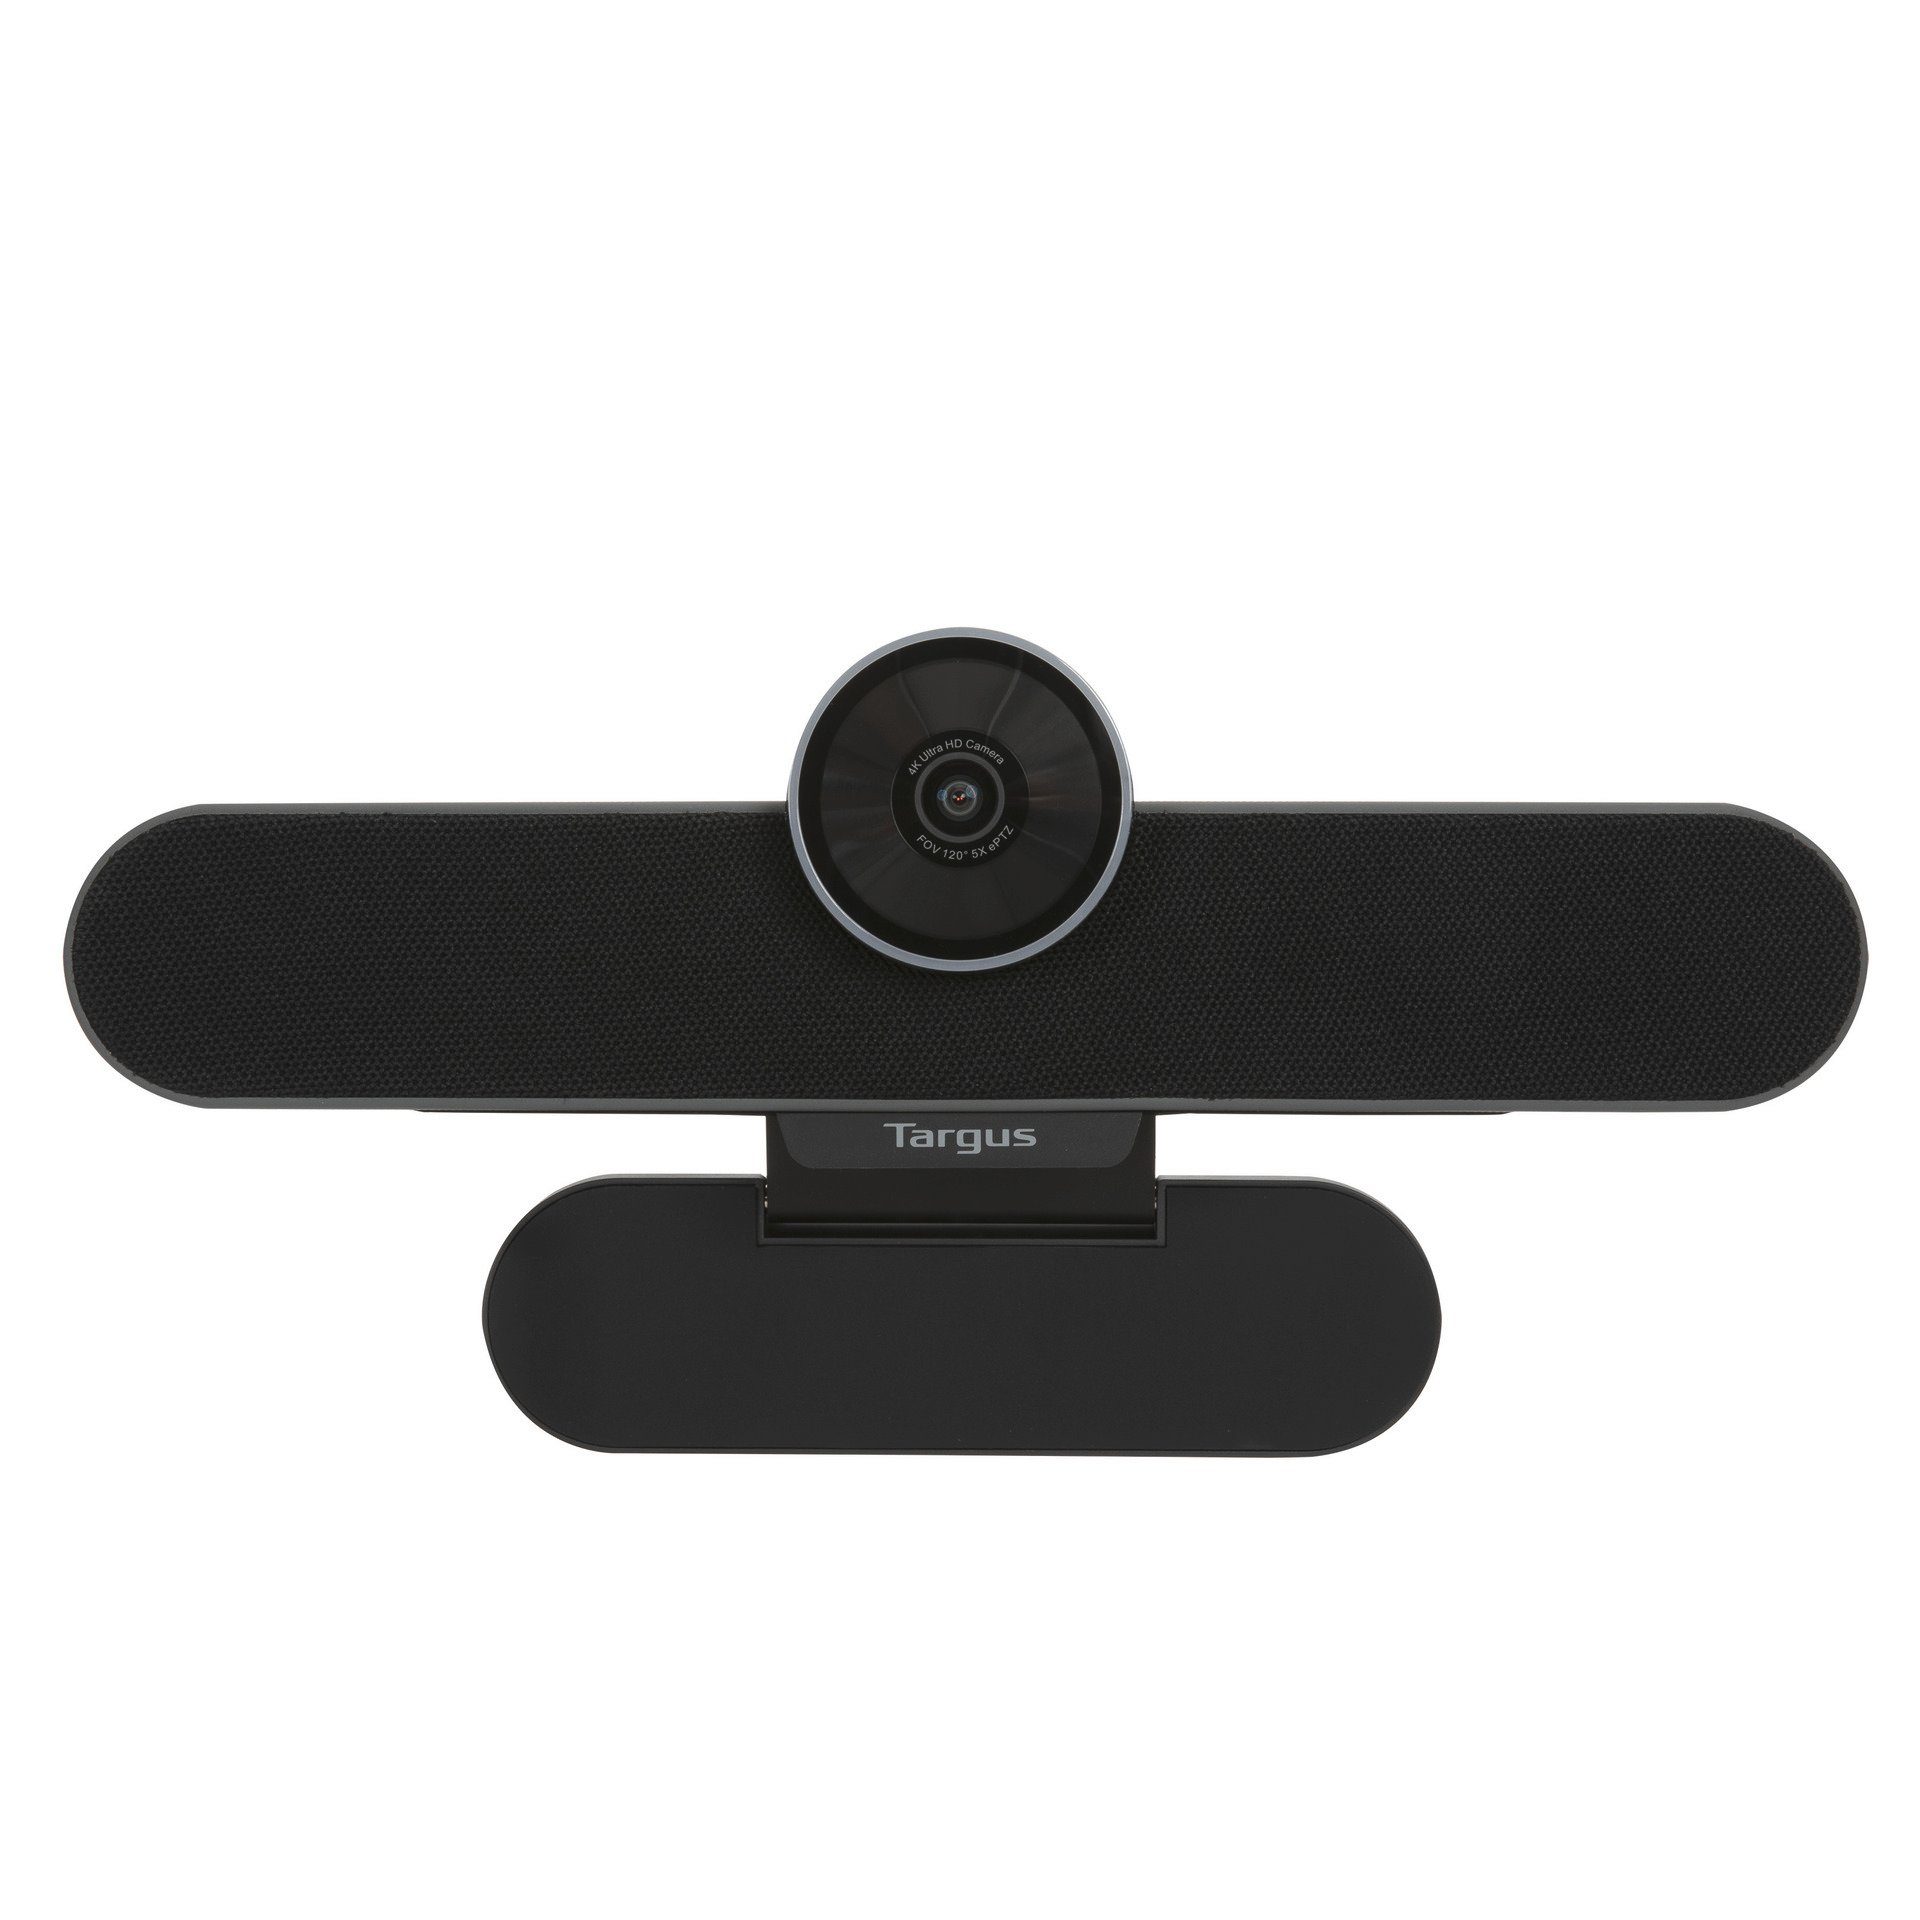 Targus All-in-One Ultra HD, System Conference Netzteil) EU Mit (4K Webcam 4K